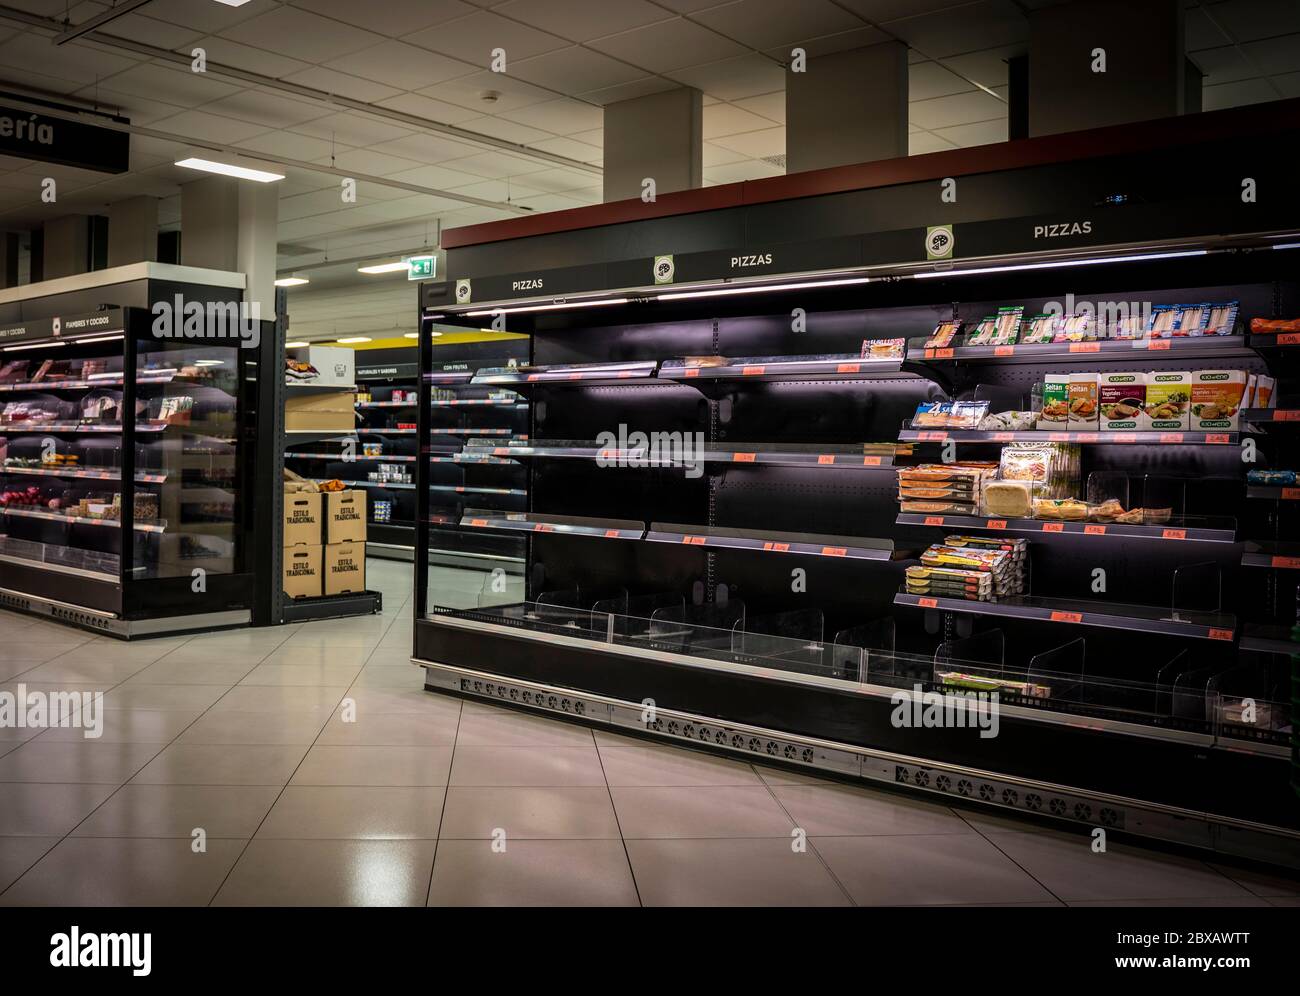 Coronavirus. Empty supermarket due to panic buying. Shortage of food and basic supplies on the shelves. Malaga, Spain - March 12, 2020. Stock Photo